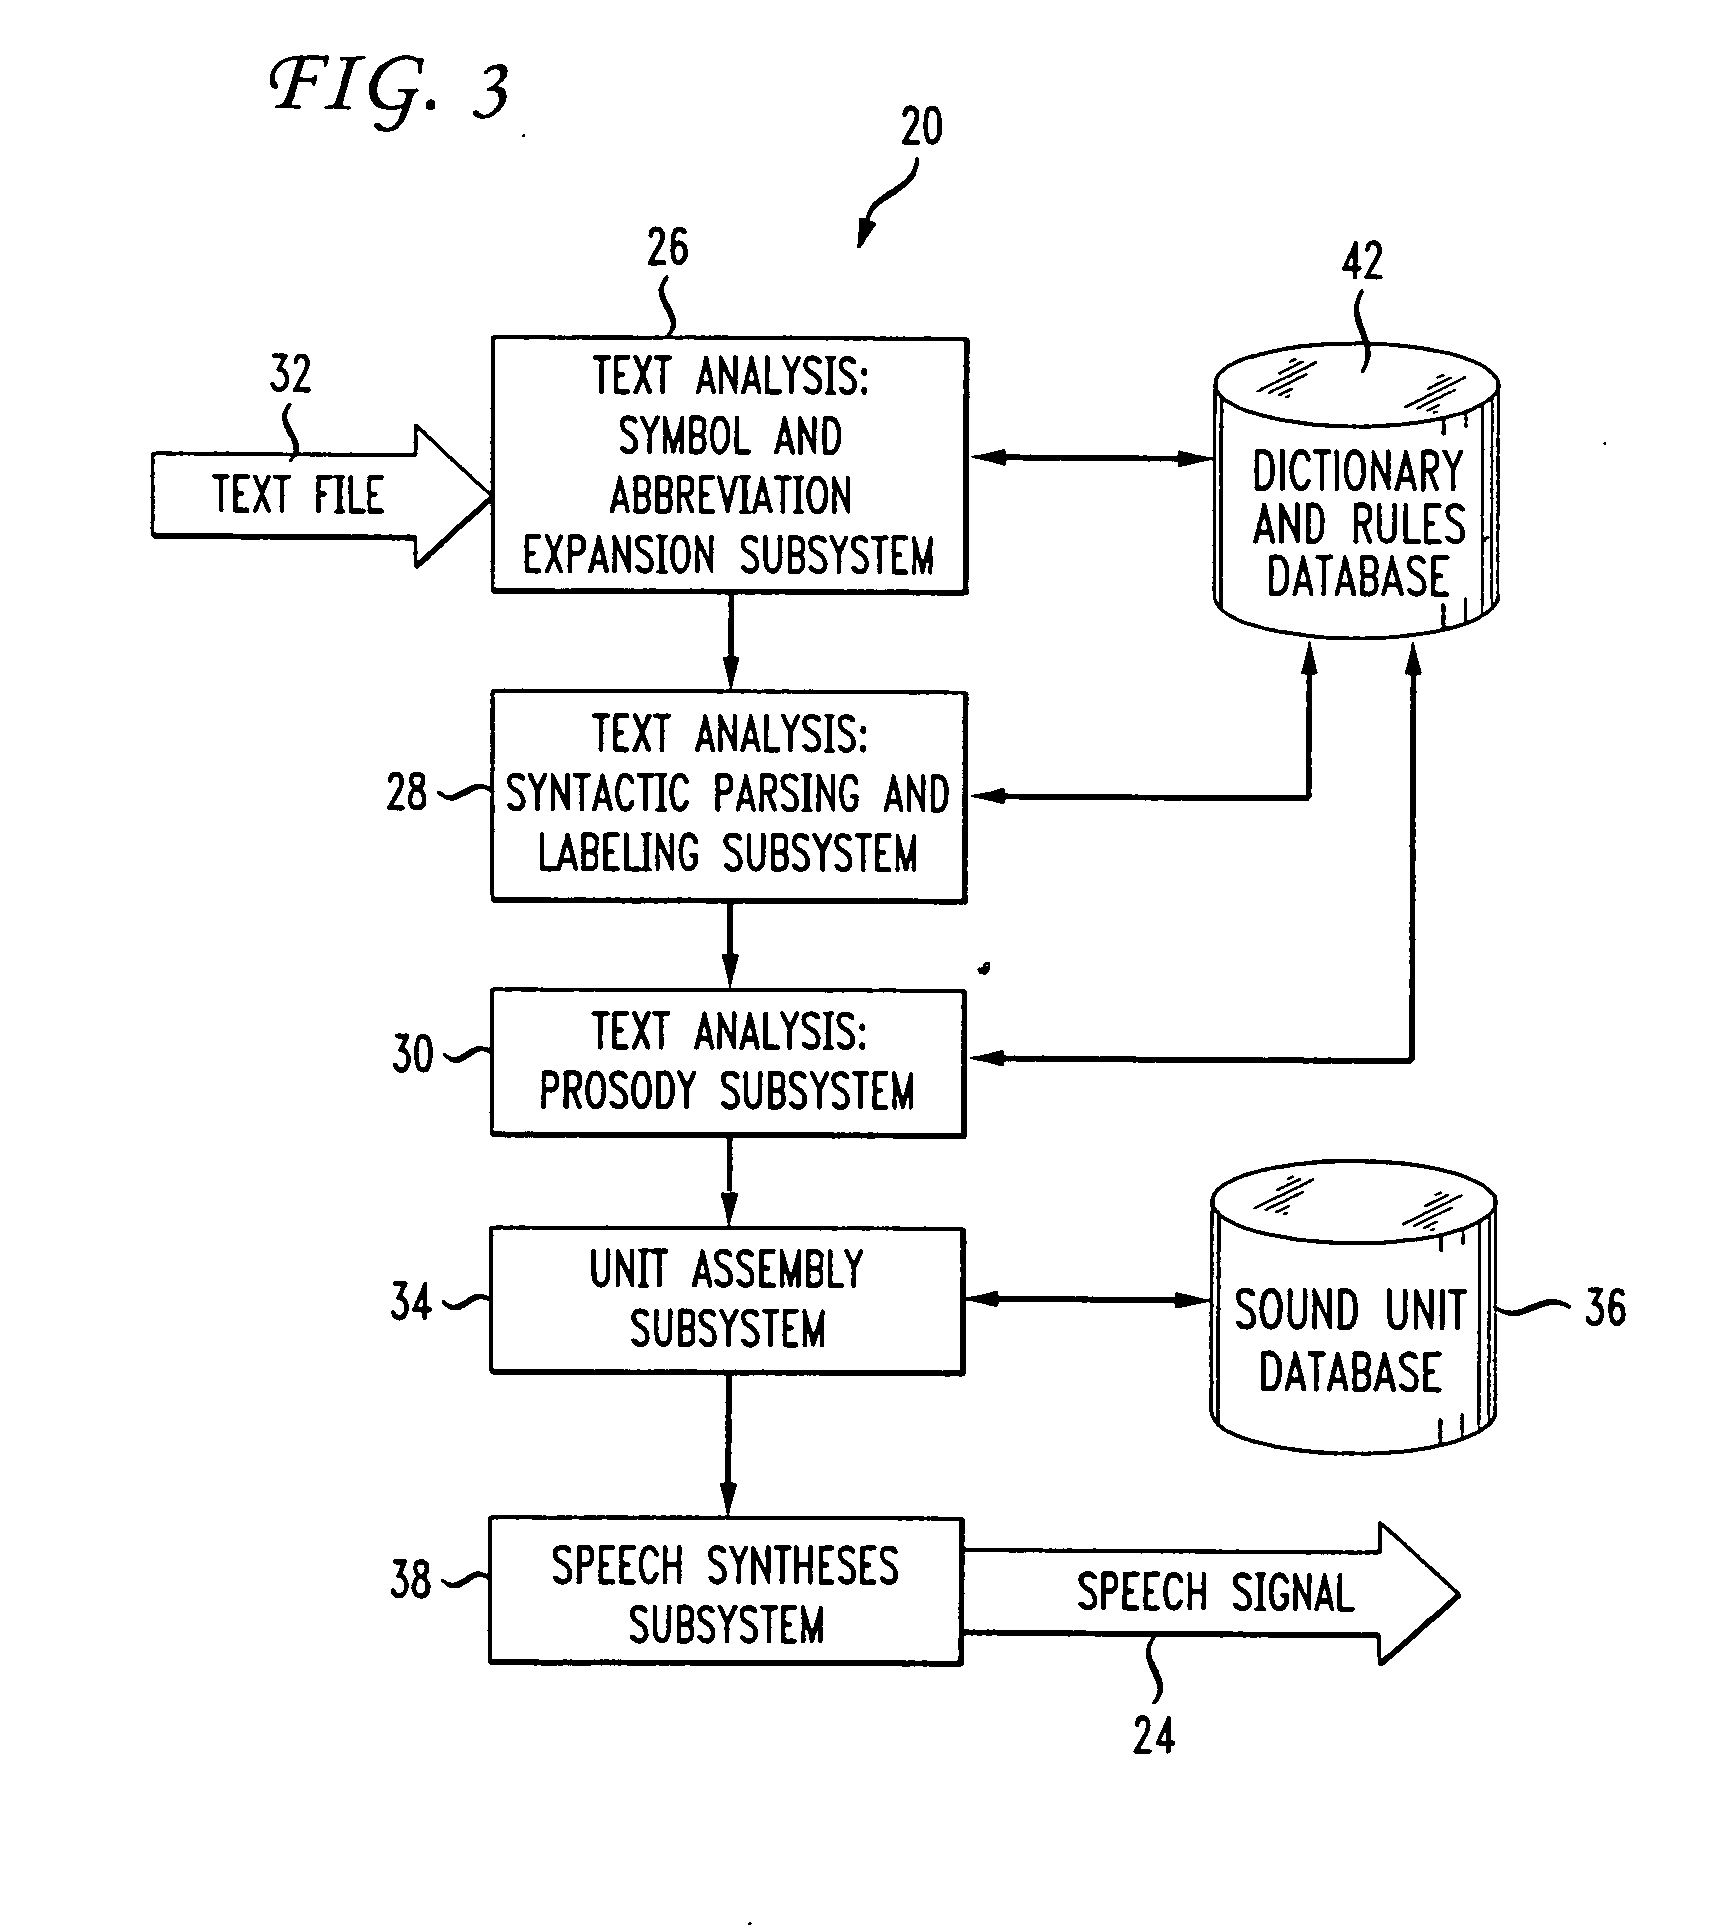 Method and apparatus for preventing speech comprehension by interactive voice response systems